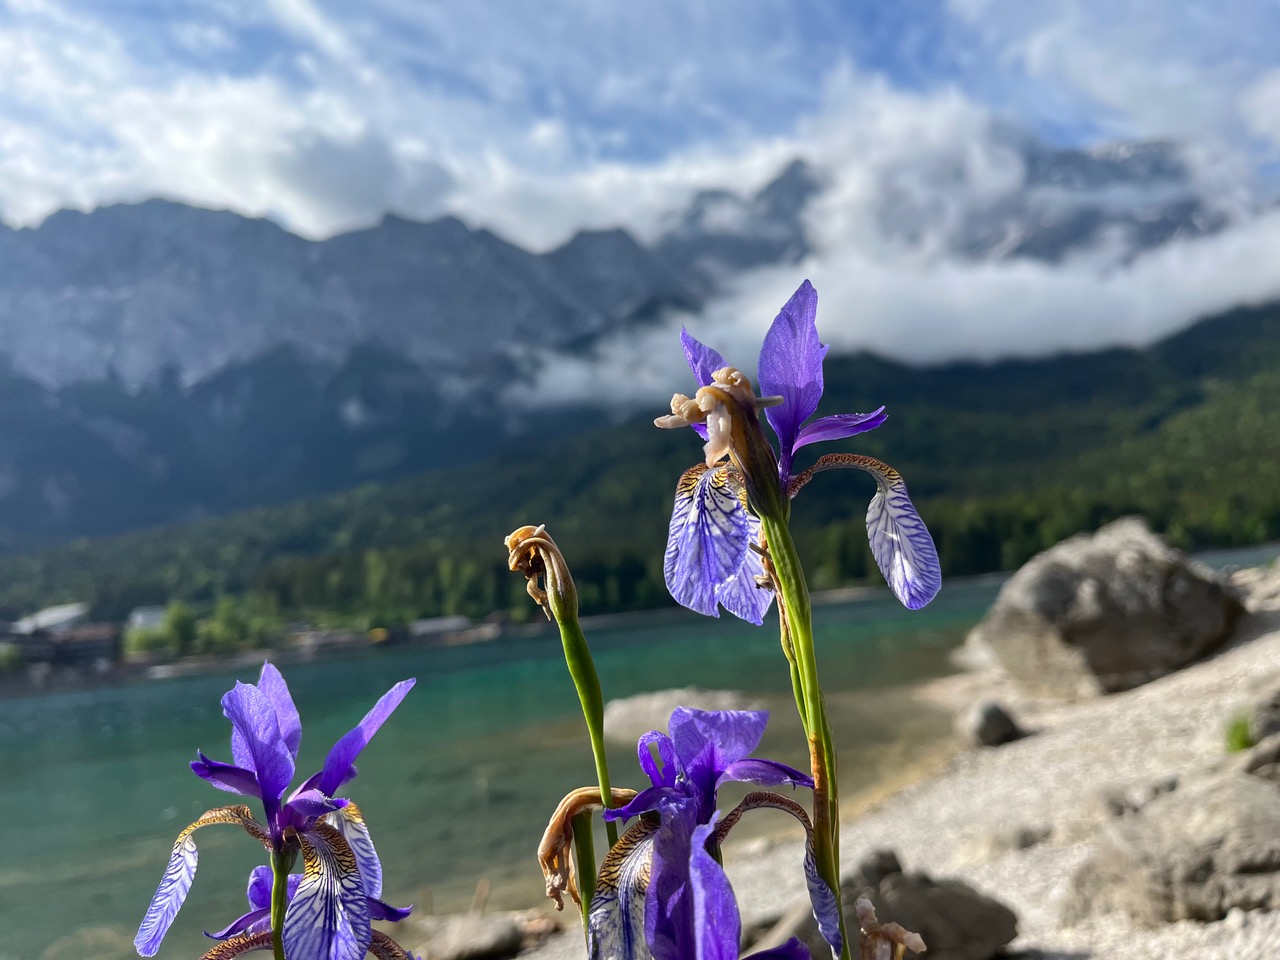 Lake Eibsee with purple flowers in the foreground